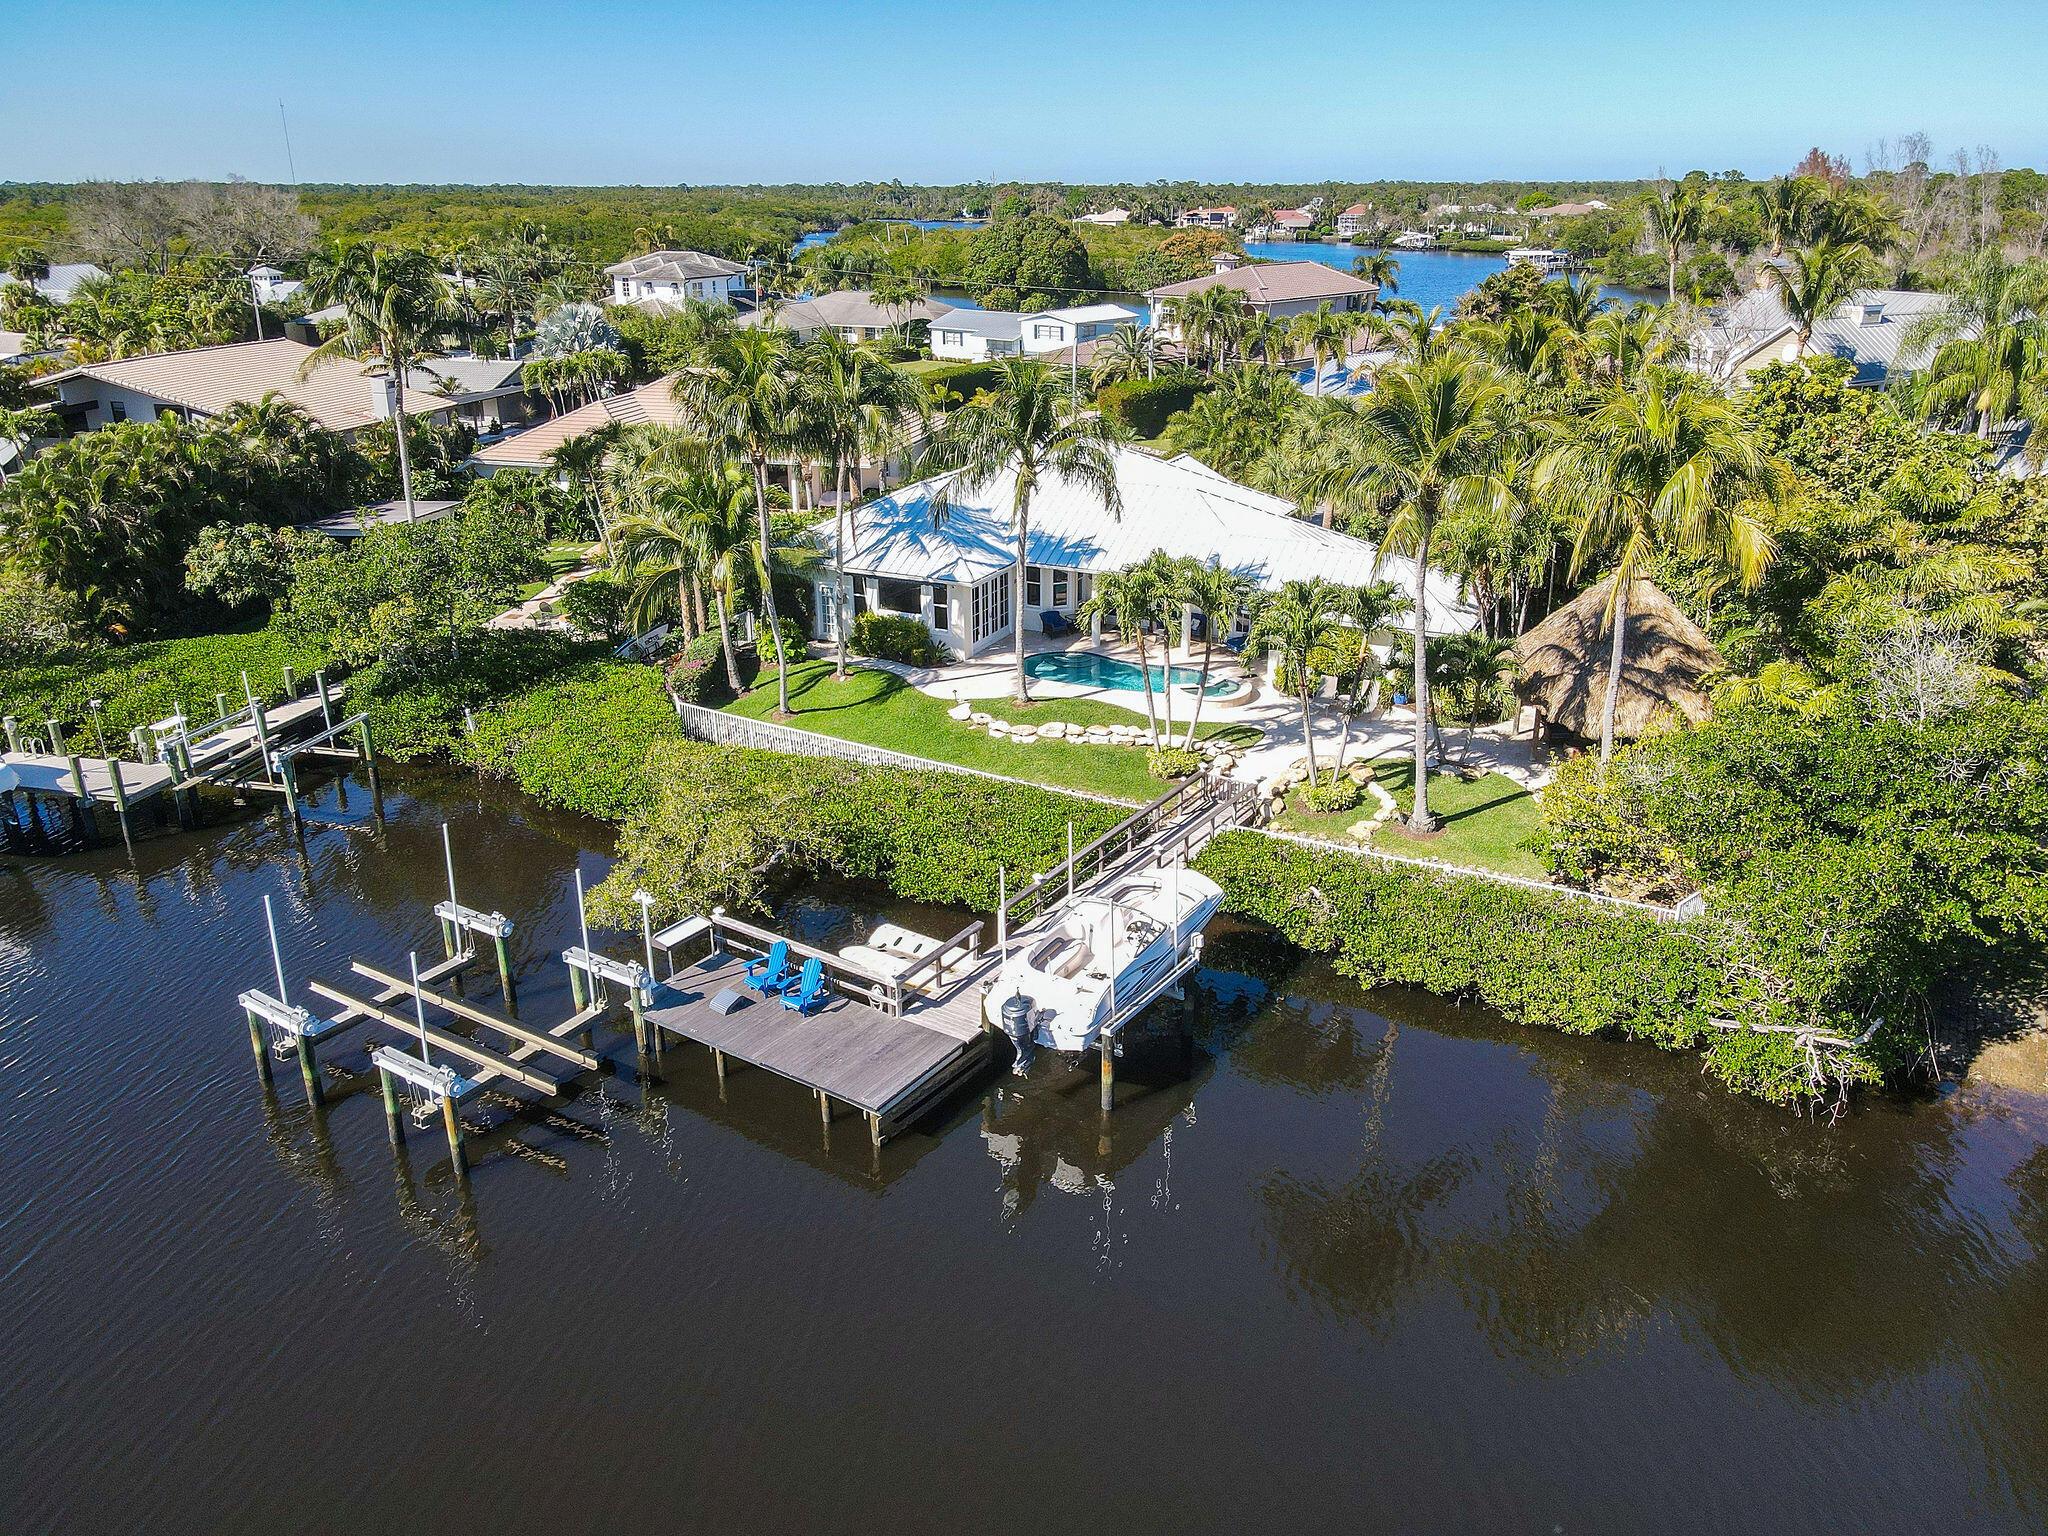 This tastefully renovated residence sits along the picturesque Loxahatchee River, offering 3 bedrooms, 3 bathrooms, 2-car garage, private pool, and spa, as well as a newer standing seam metal roof installed in 2019. The property features IPE hardwood dock complete with 9,000 lb. and 32,000 lb. lifts, along with a floating dock designed for jet skis. Outside, an expansive pool and spa area awaits, accompanied by a charming Tiki hut equipped with a large gas grill, and connections for a TV. Inside, the modern kitchen boasts top-of-the-line appliances including a Sub-Zero fridge, wine cooler, Wolff double oven and microwave, and Miele dishwasher. Impact glass windows throughout and a 32K (+/-) whole house generator ensure safety while adding convenience and peace of mind.